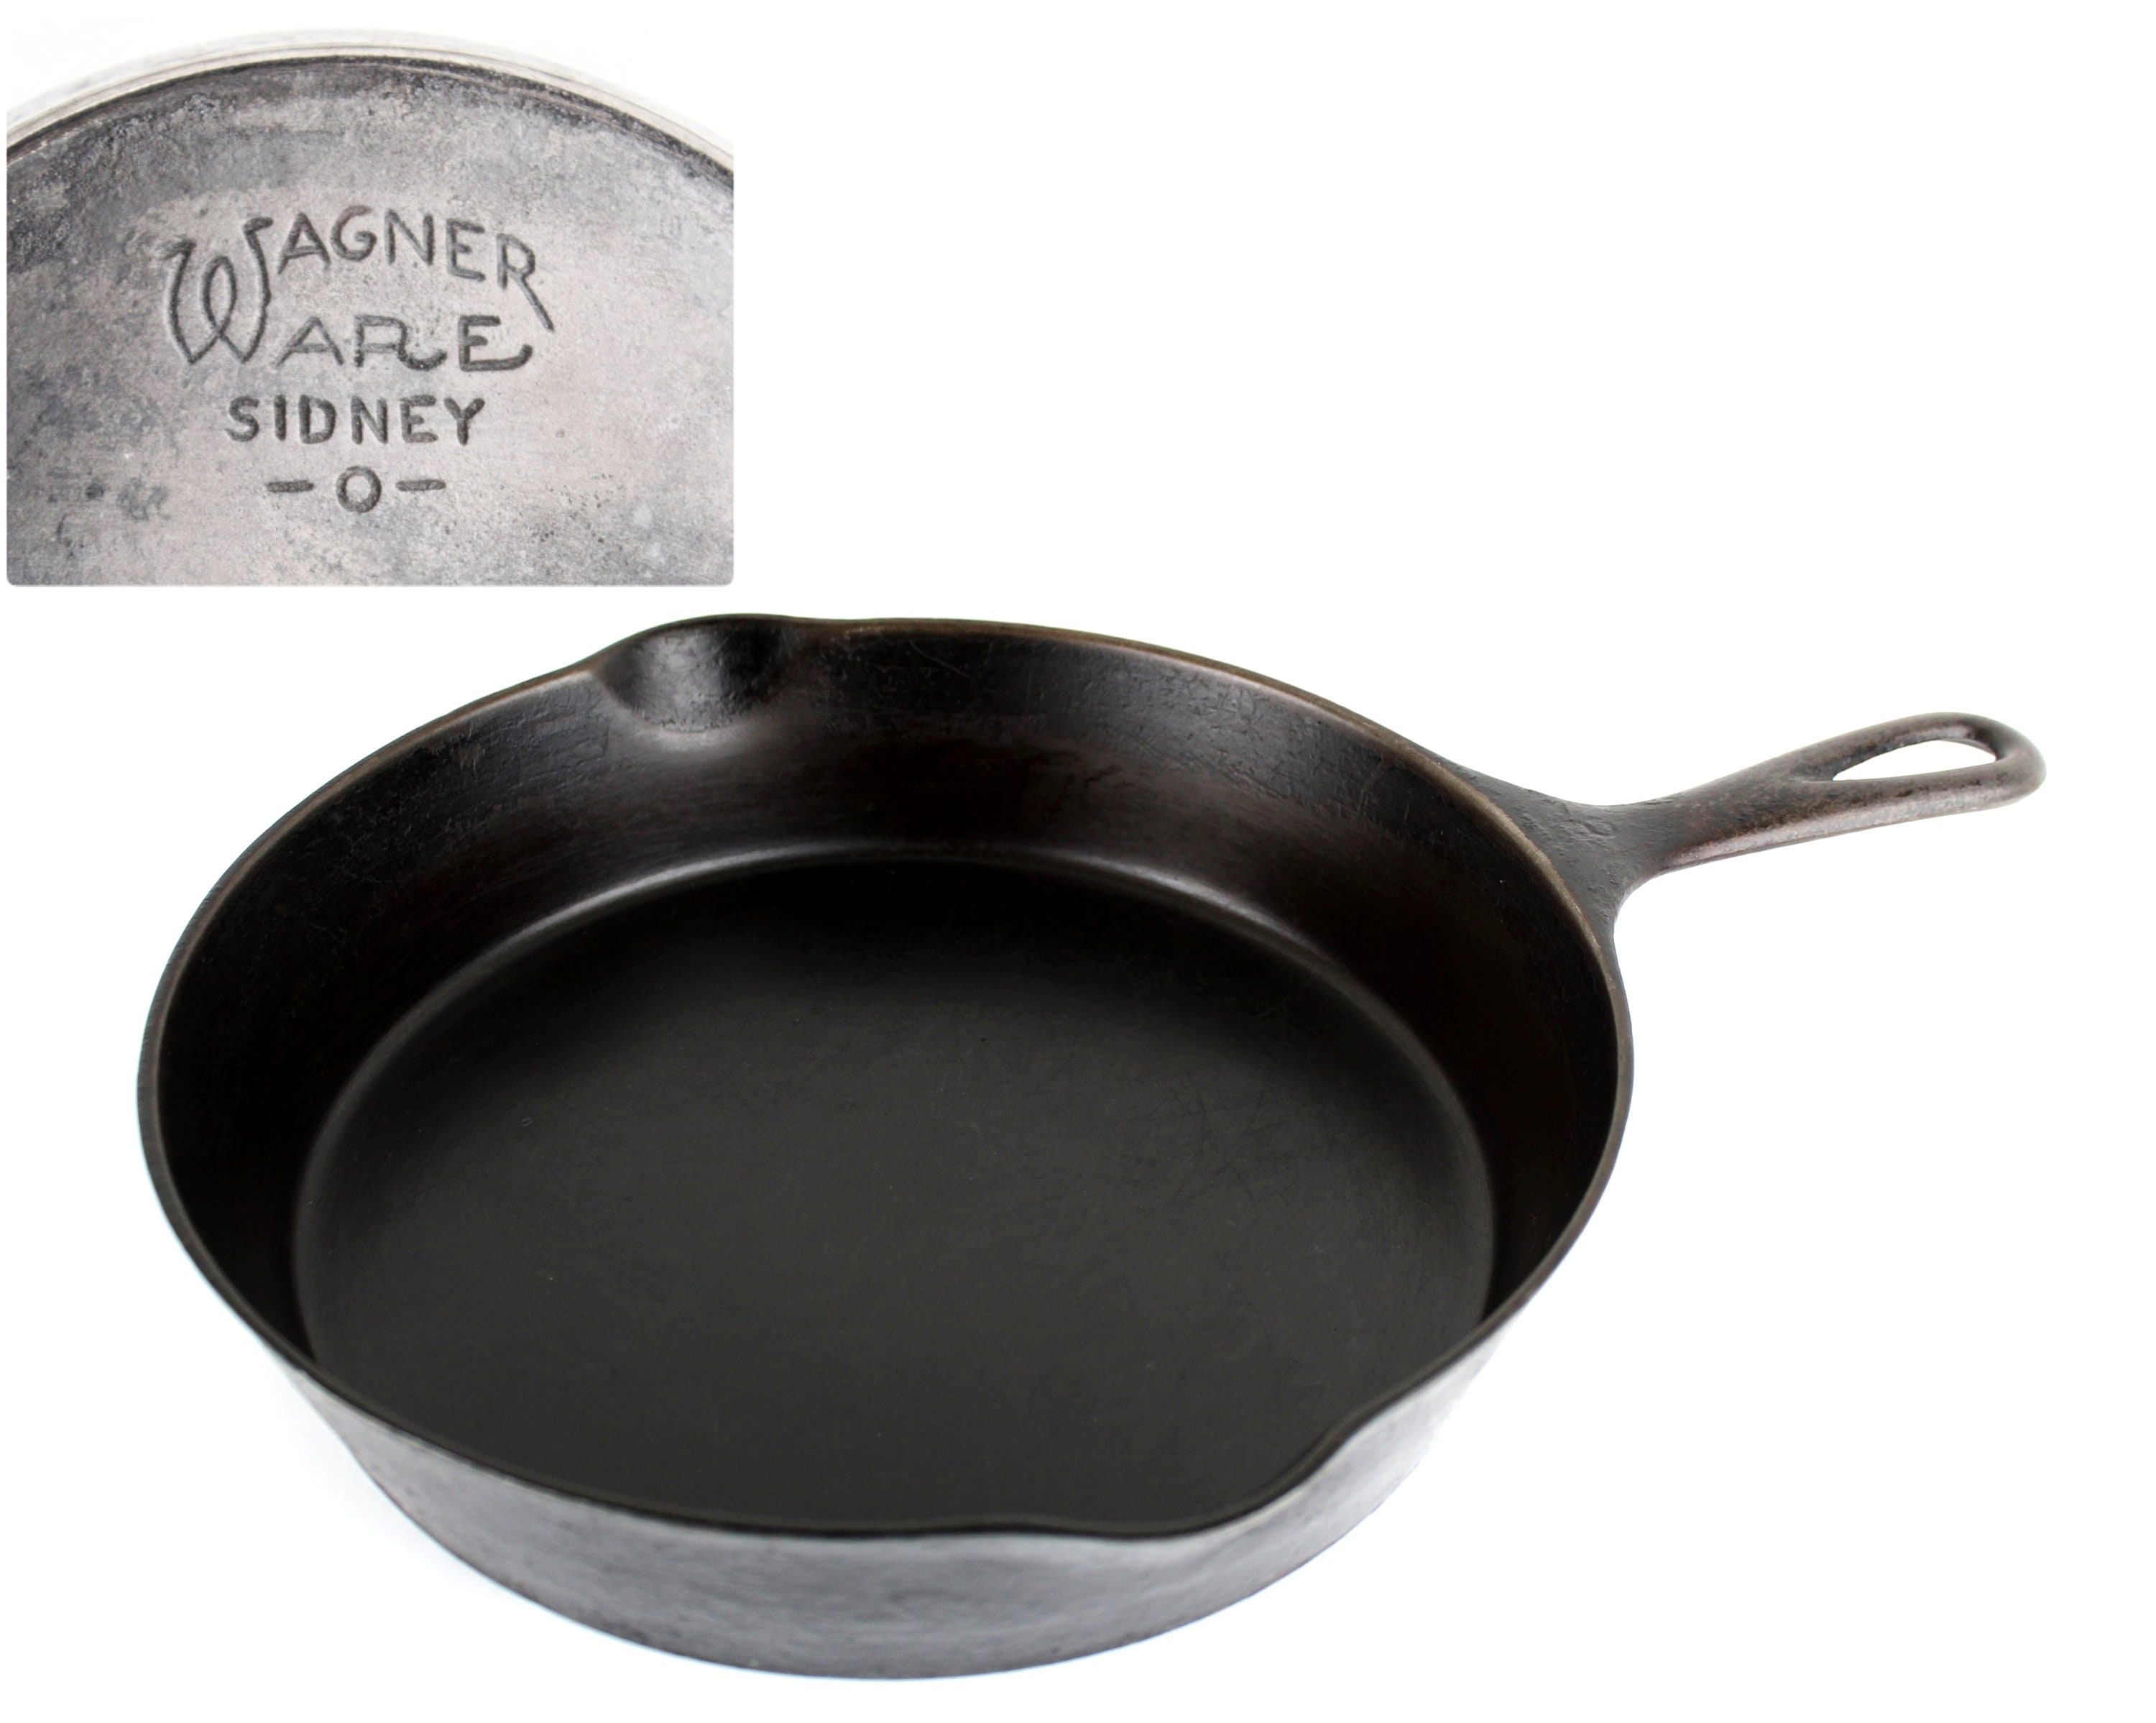 Wagner Ware 8 Cast Iron Pan.